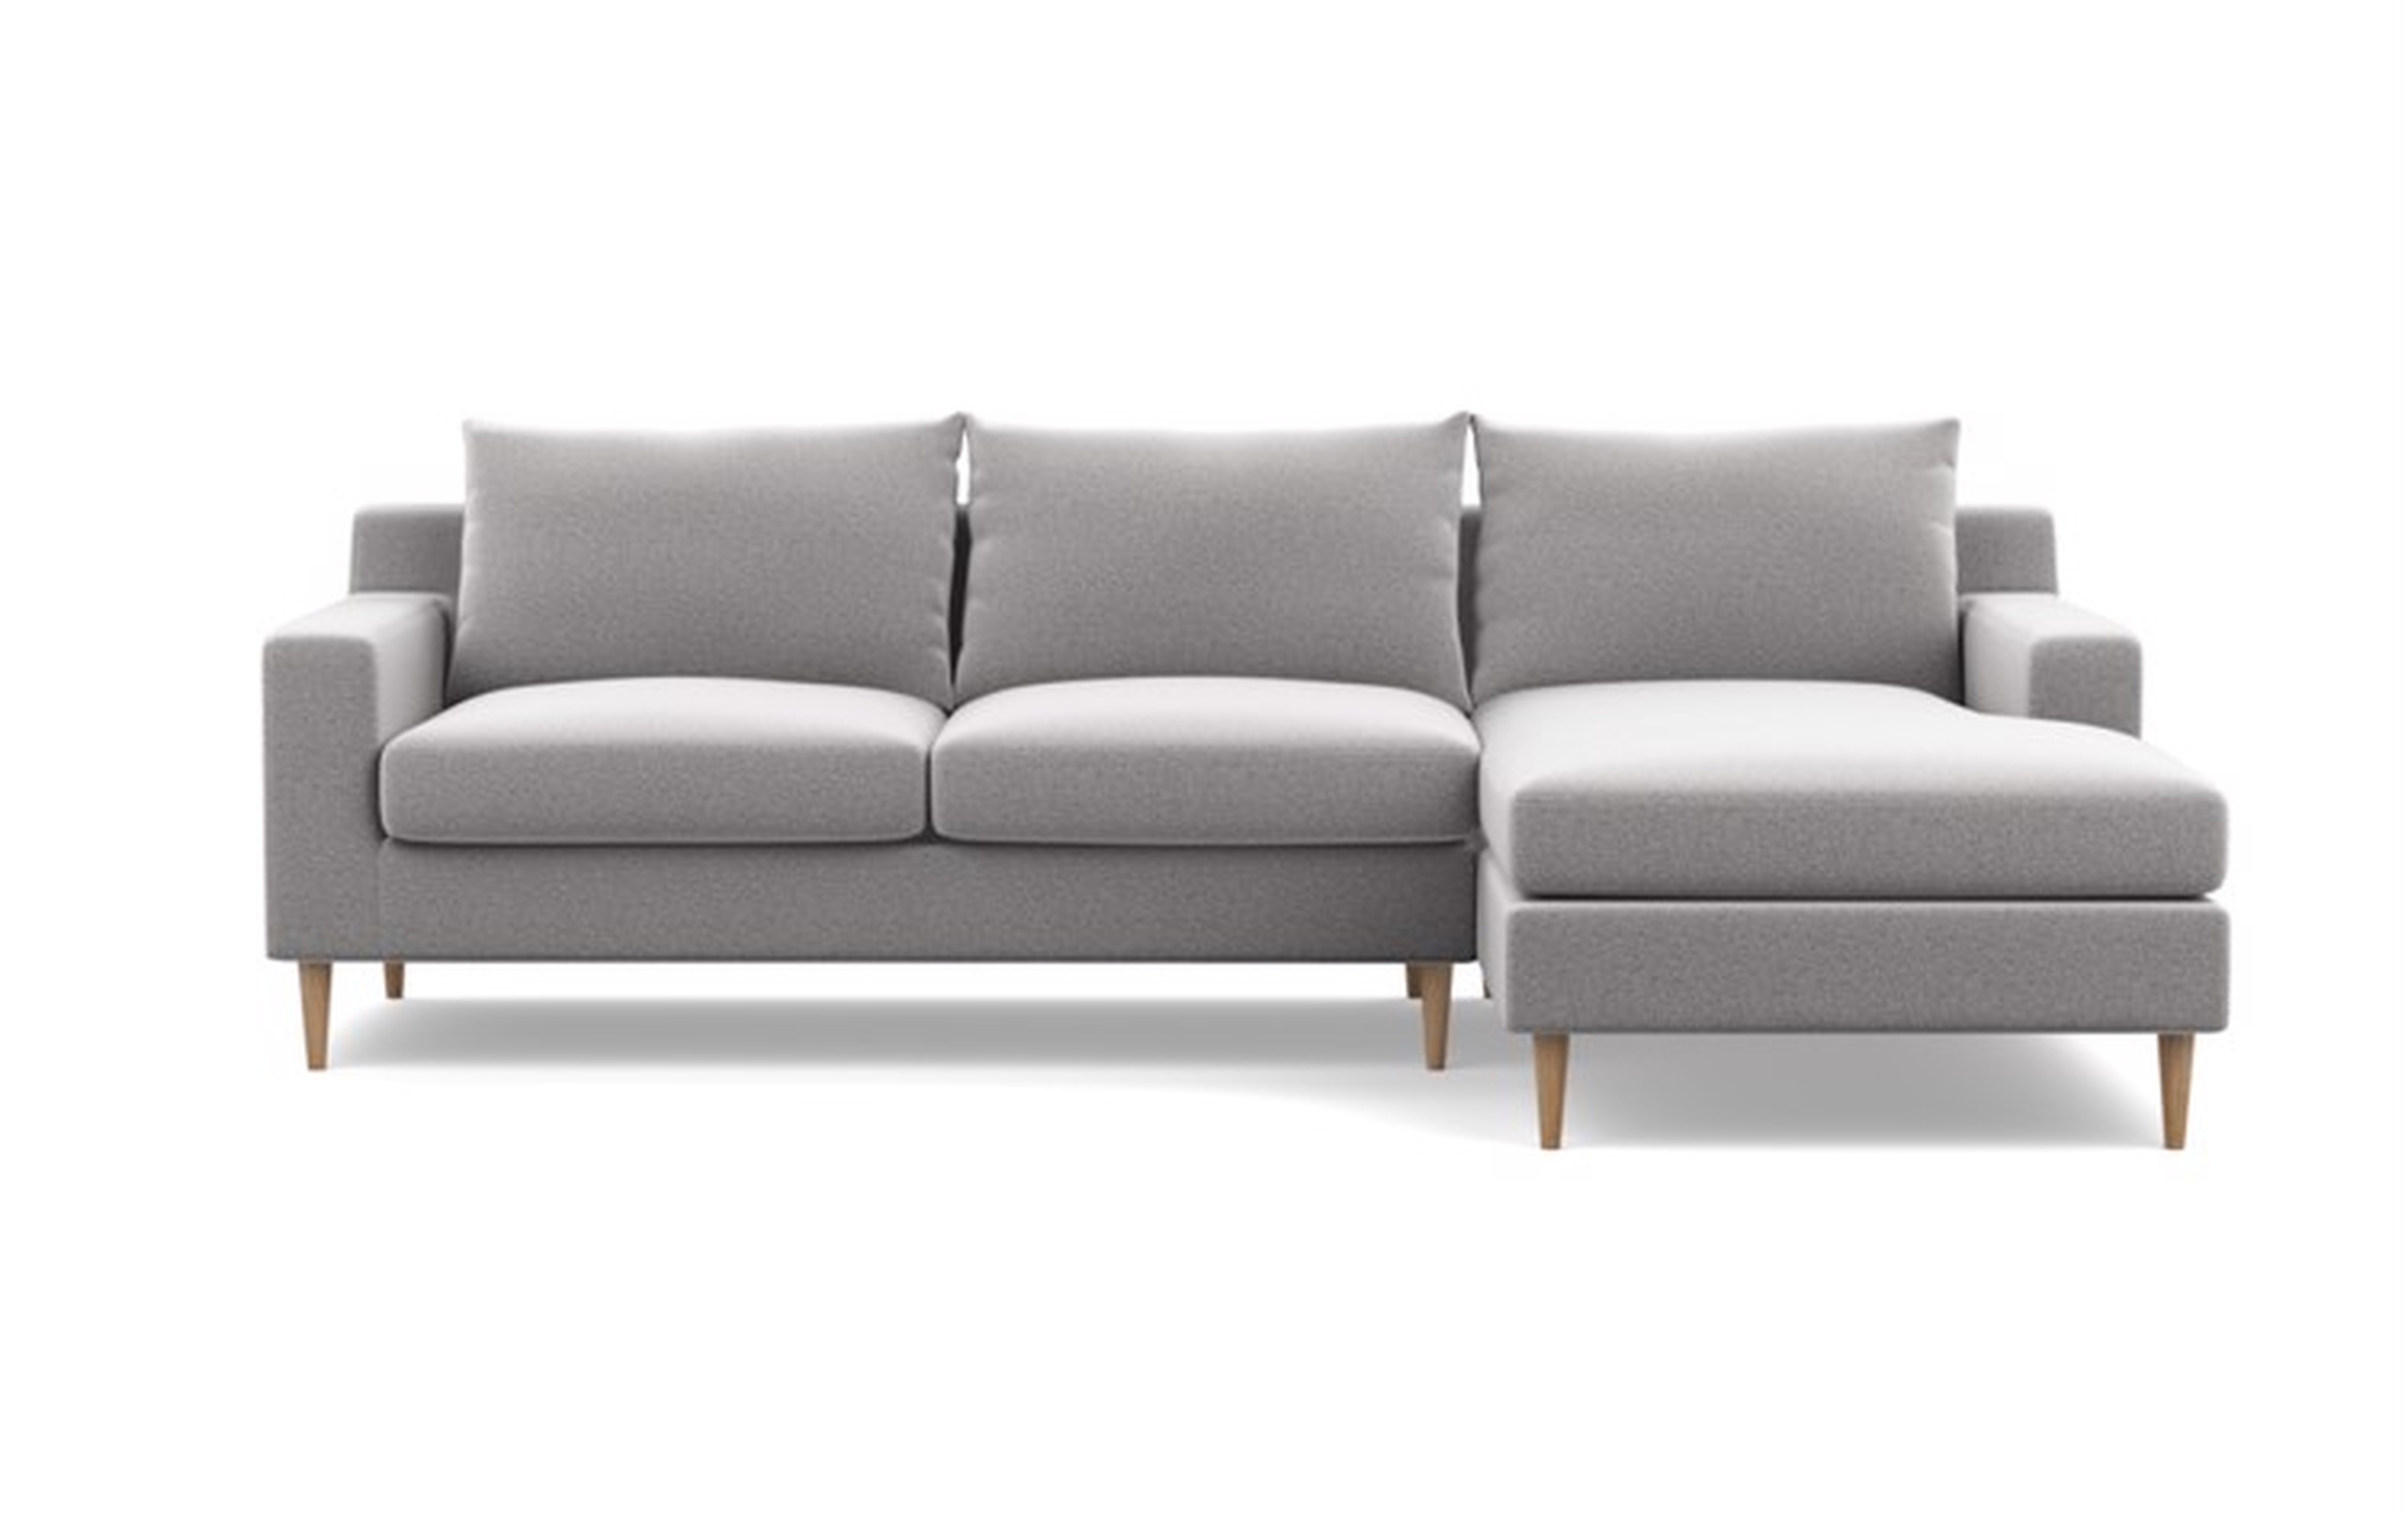 Sloan Sectional Sofa with Right Facing Chaise - Interior Define